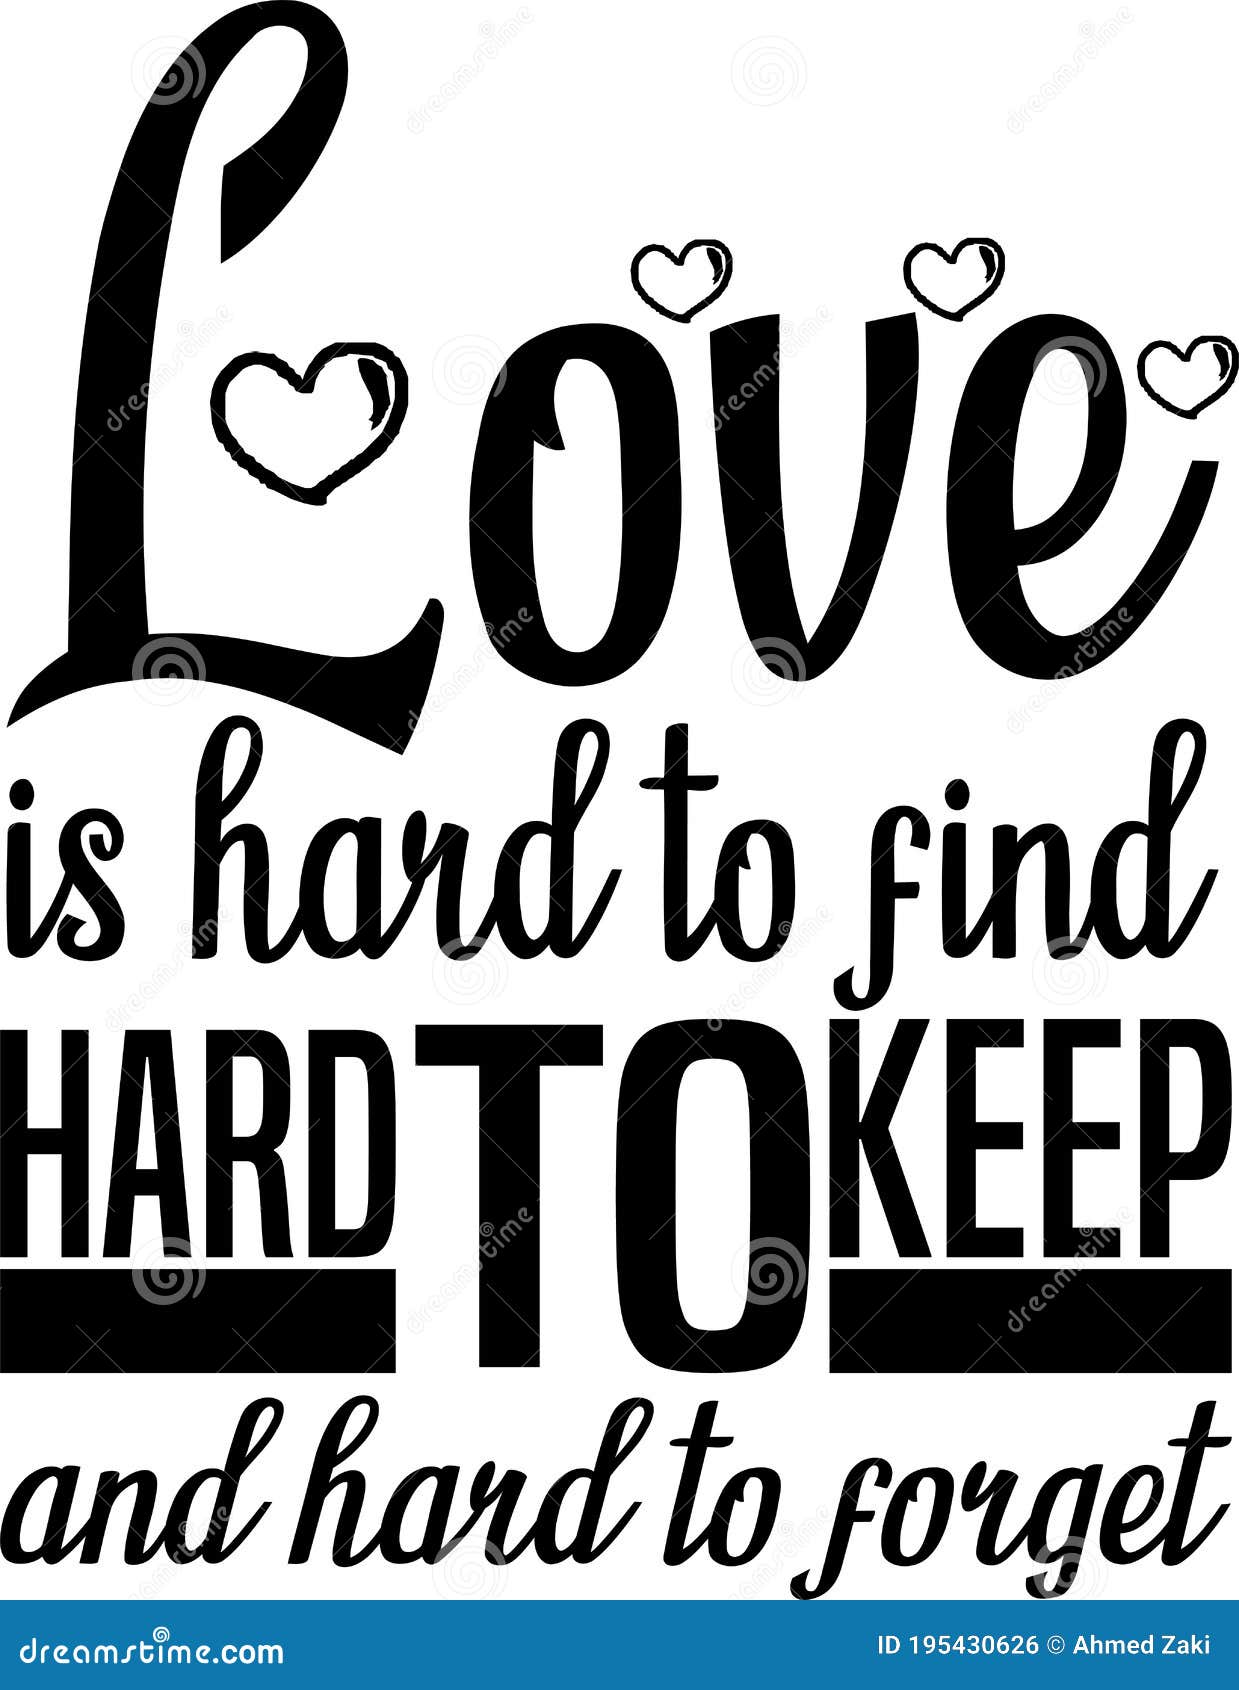 Love is Hard To Find, Hard To Keep, and Hard To  about Broken  Heart. Hand Drawn Vector Trend Calligraphy Stock Vector - Illustration of  graphic, retro: 195430626